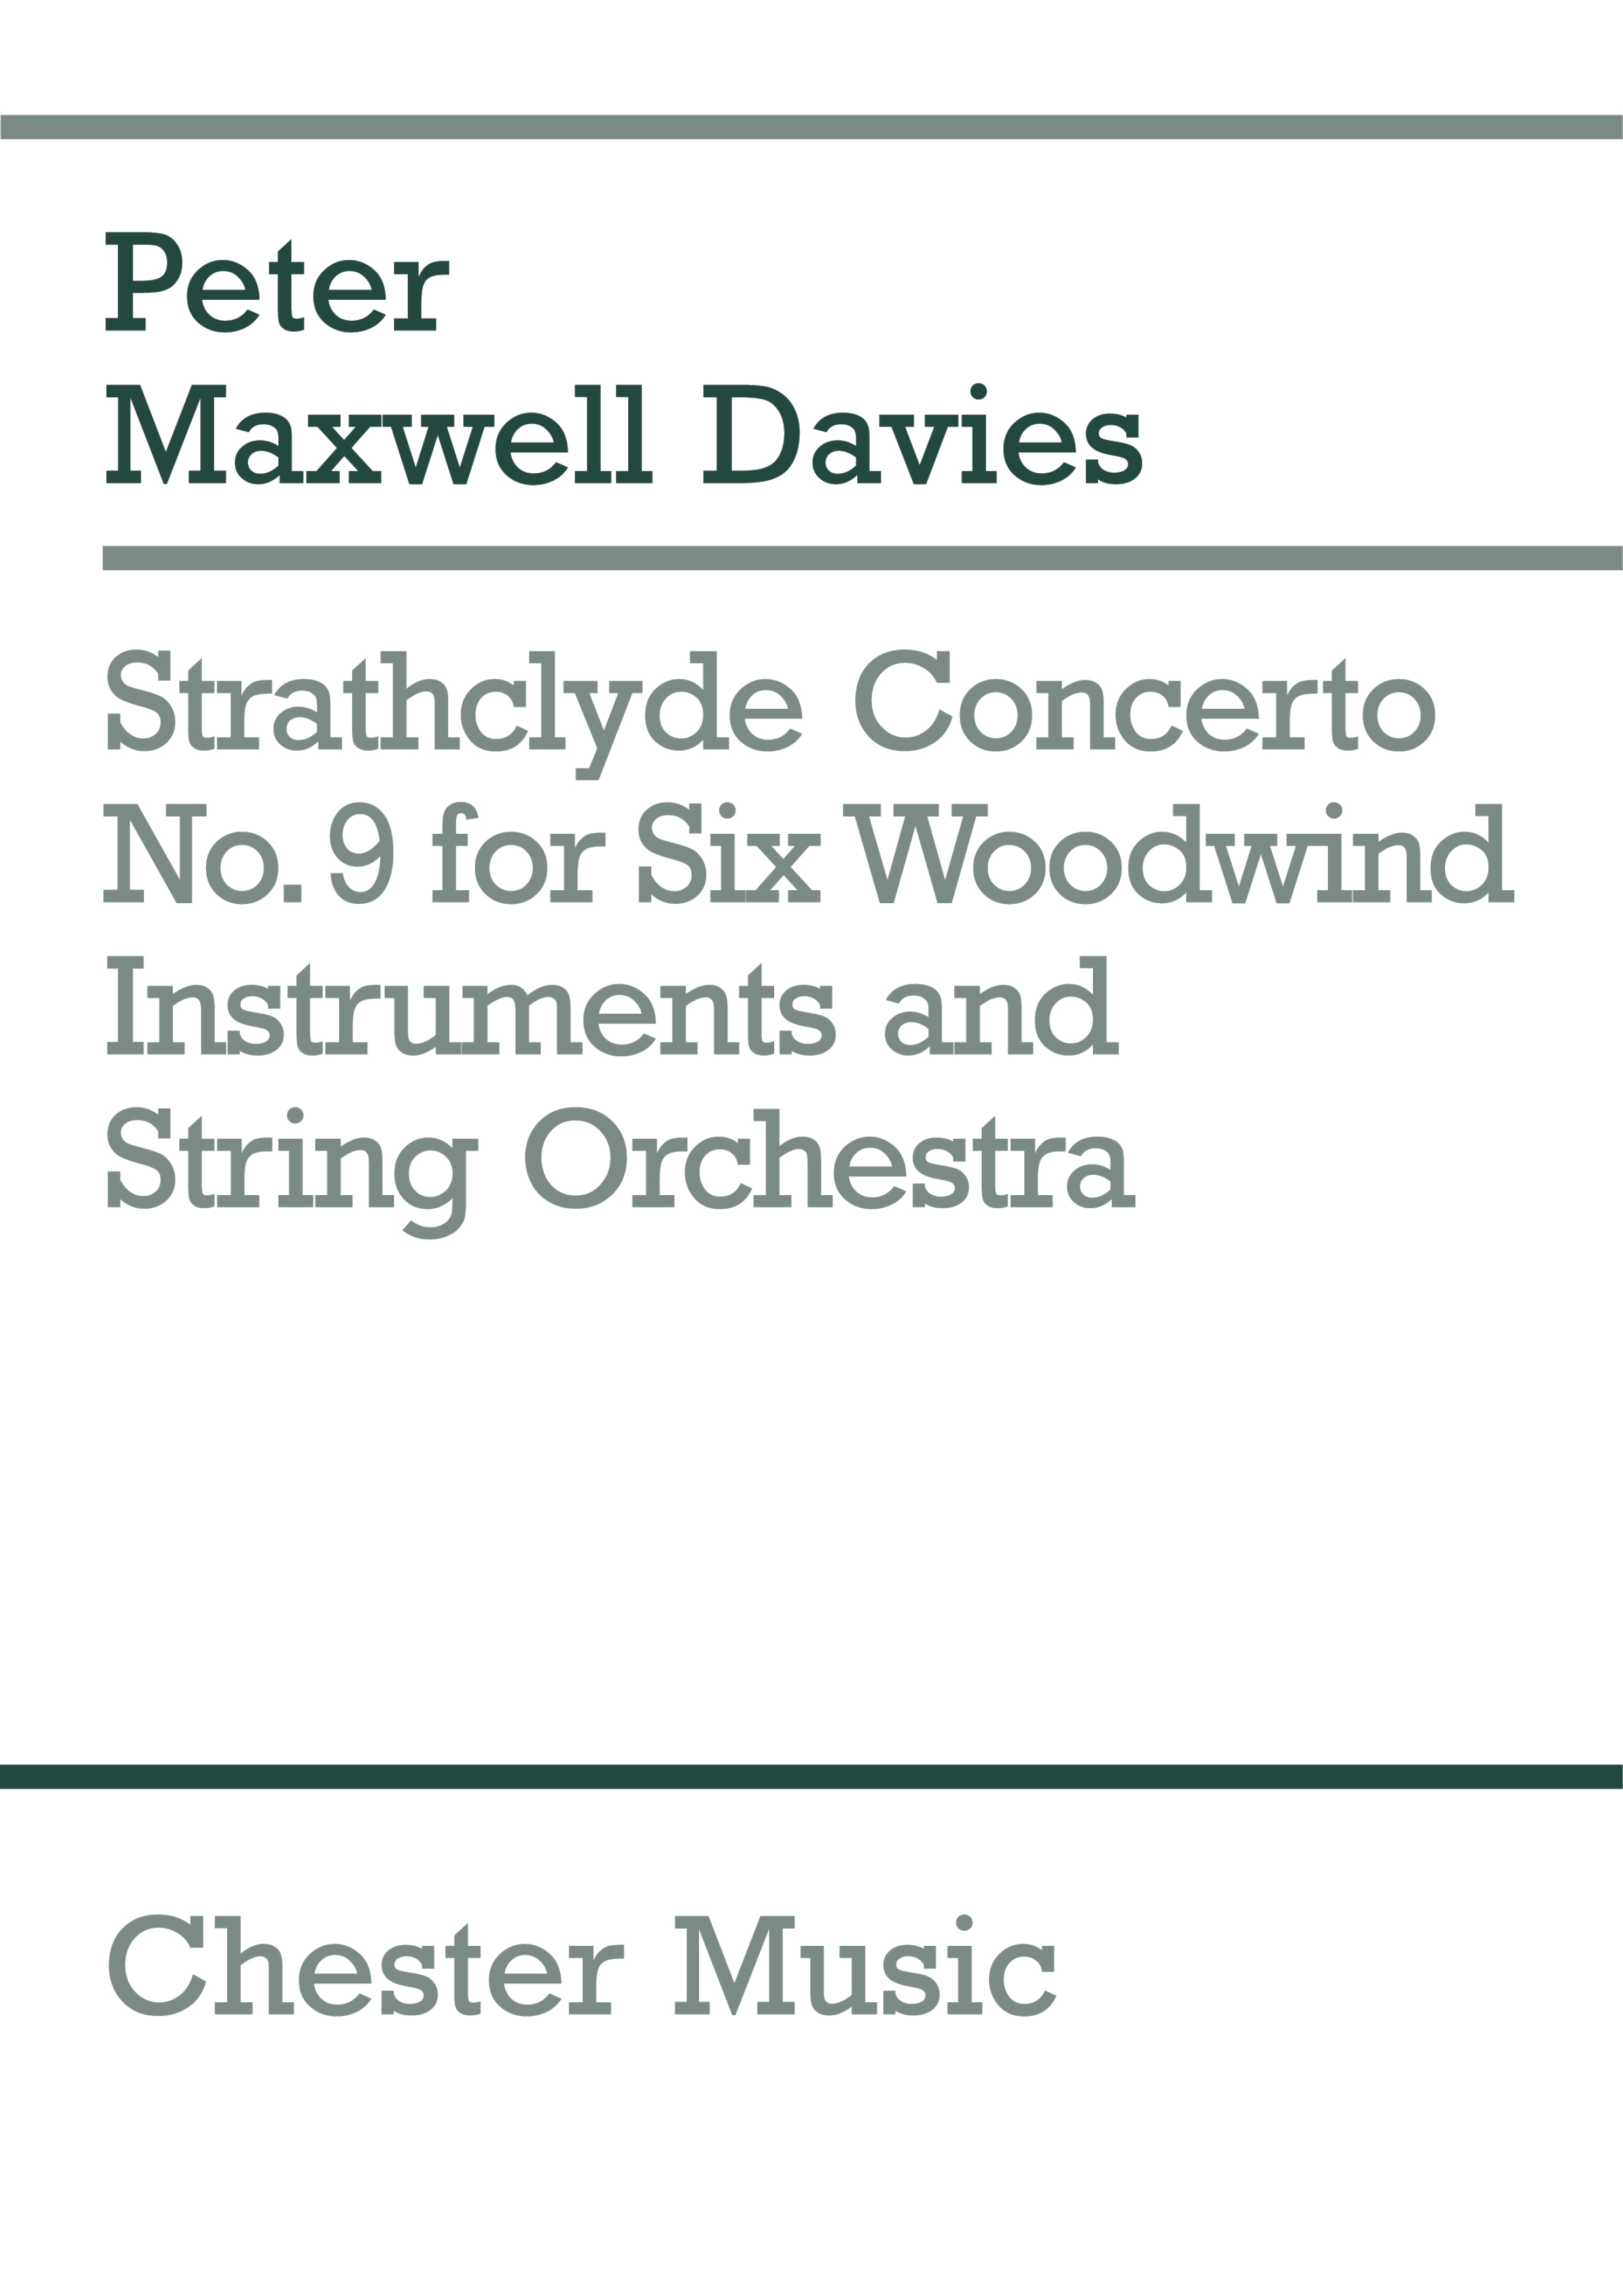 Peter Maxwell Davies: Strathclyde Concerto No. 9 (Miniature Score): String